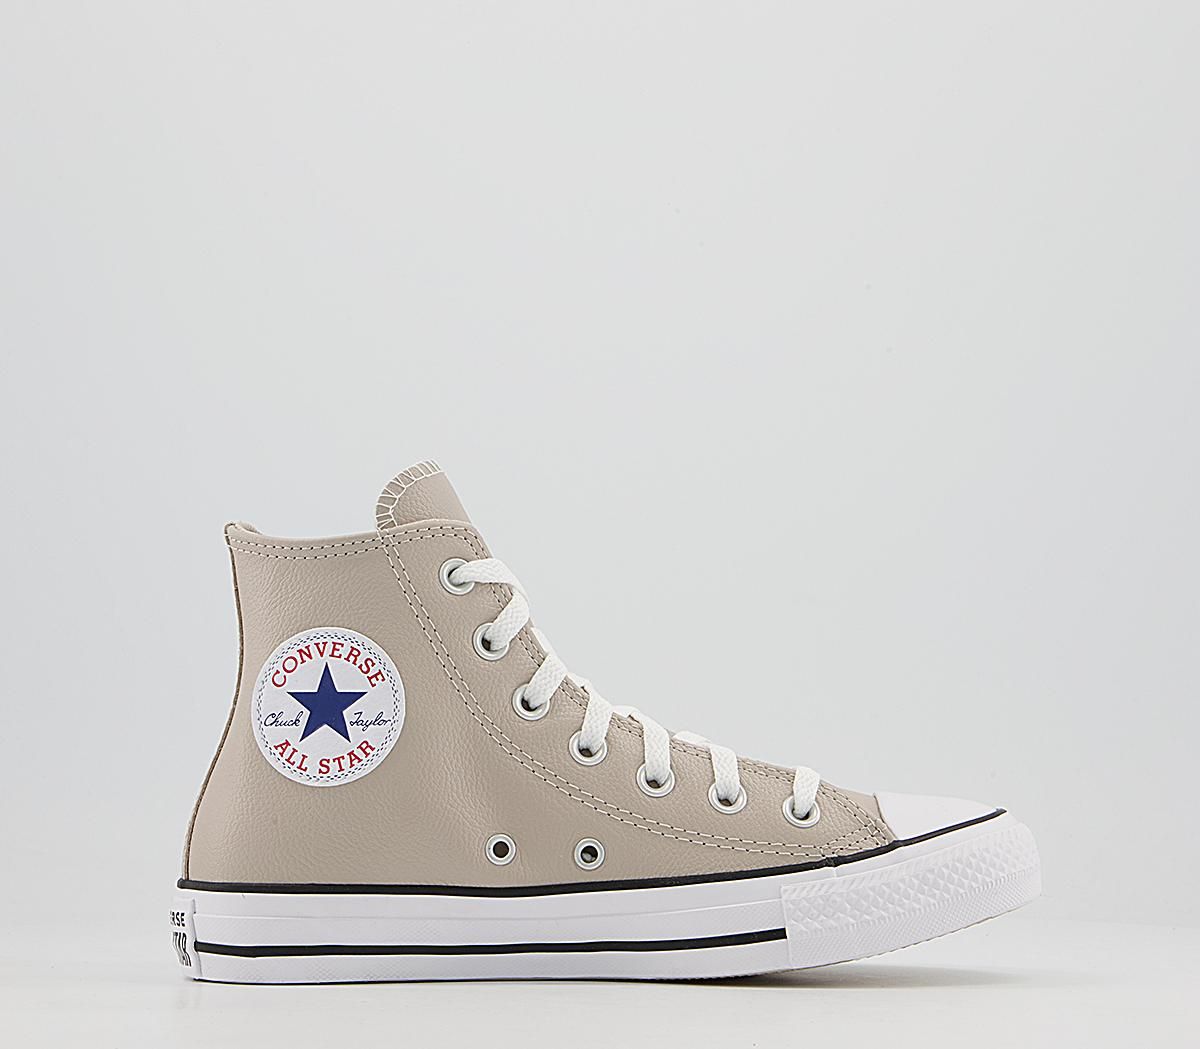 Converse
								All Star Hi Leather Trainers
								String | OFFICE London (UK)